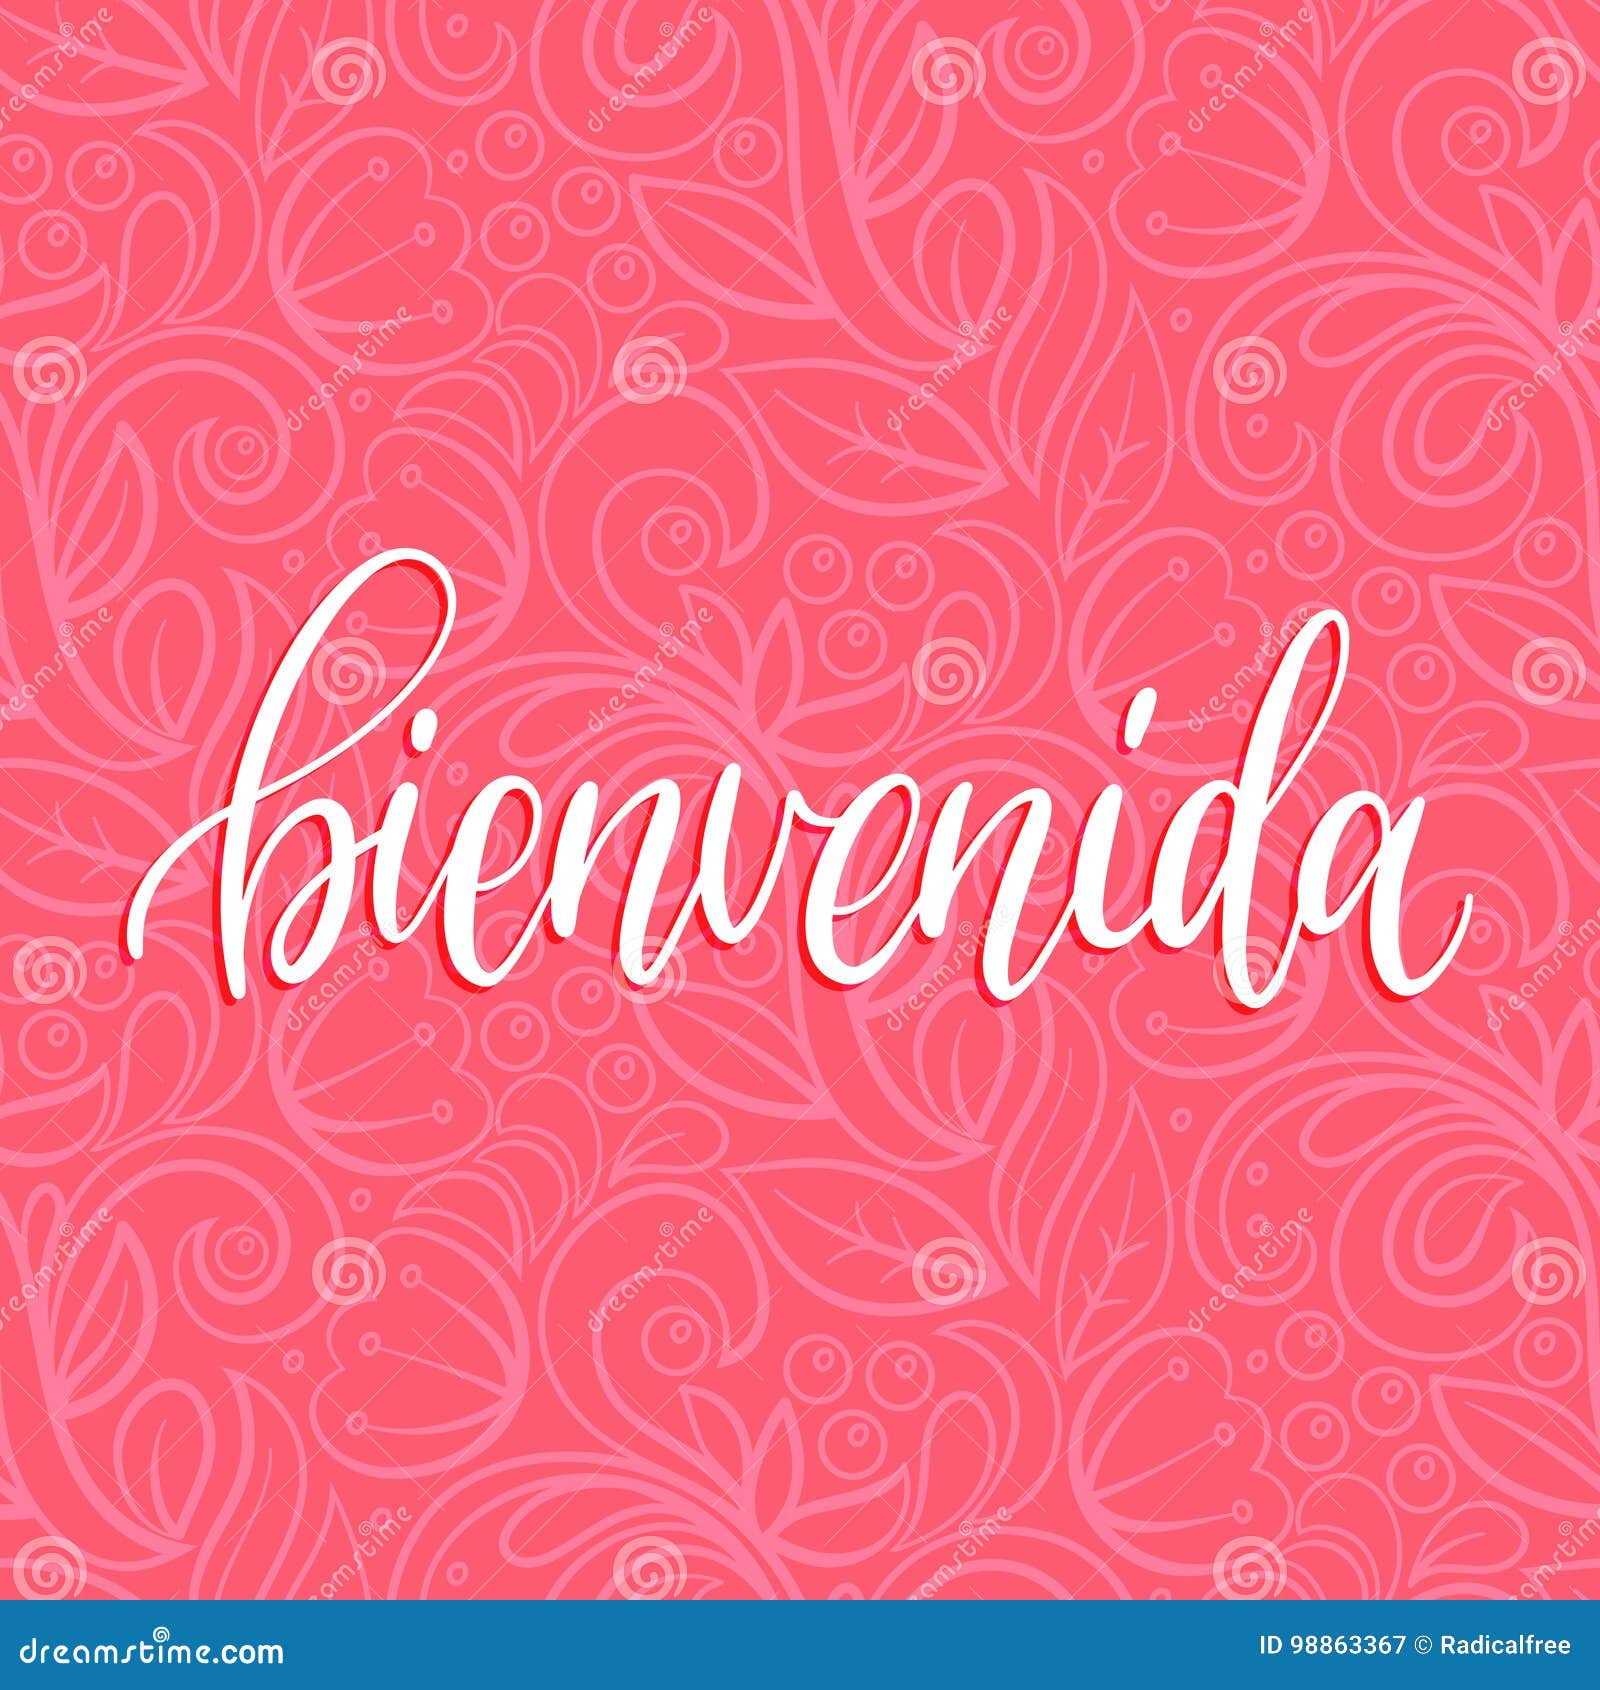  bienvenida calligraphy, spanish translation of welcome phrase. hand lettering on abstract pink background